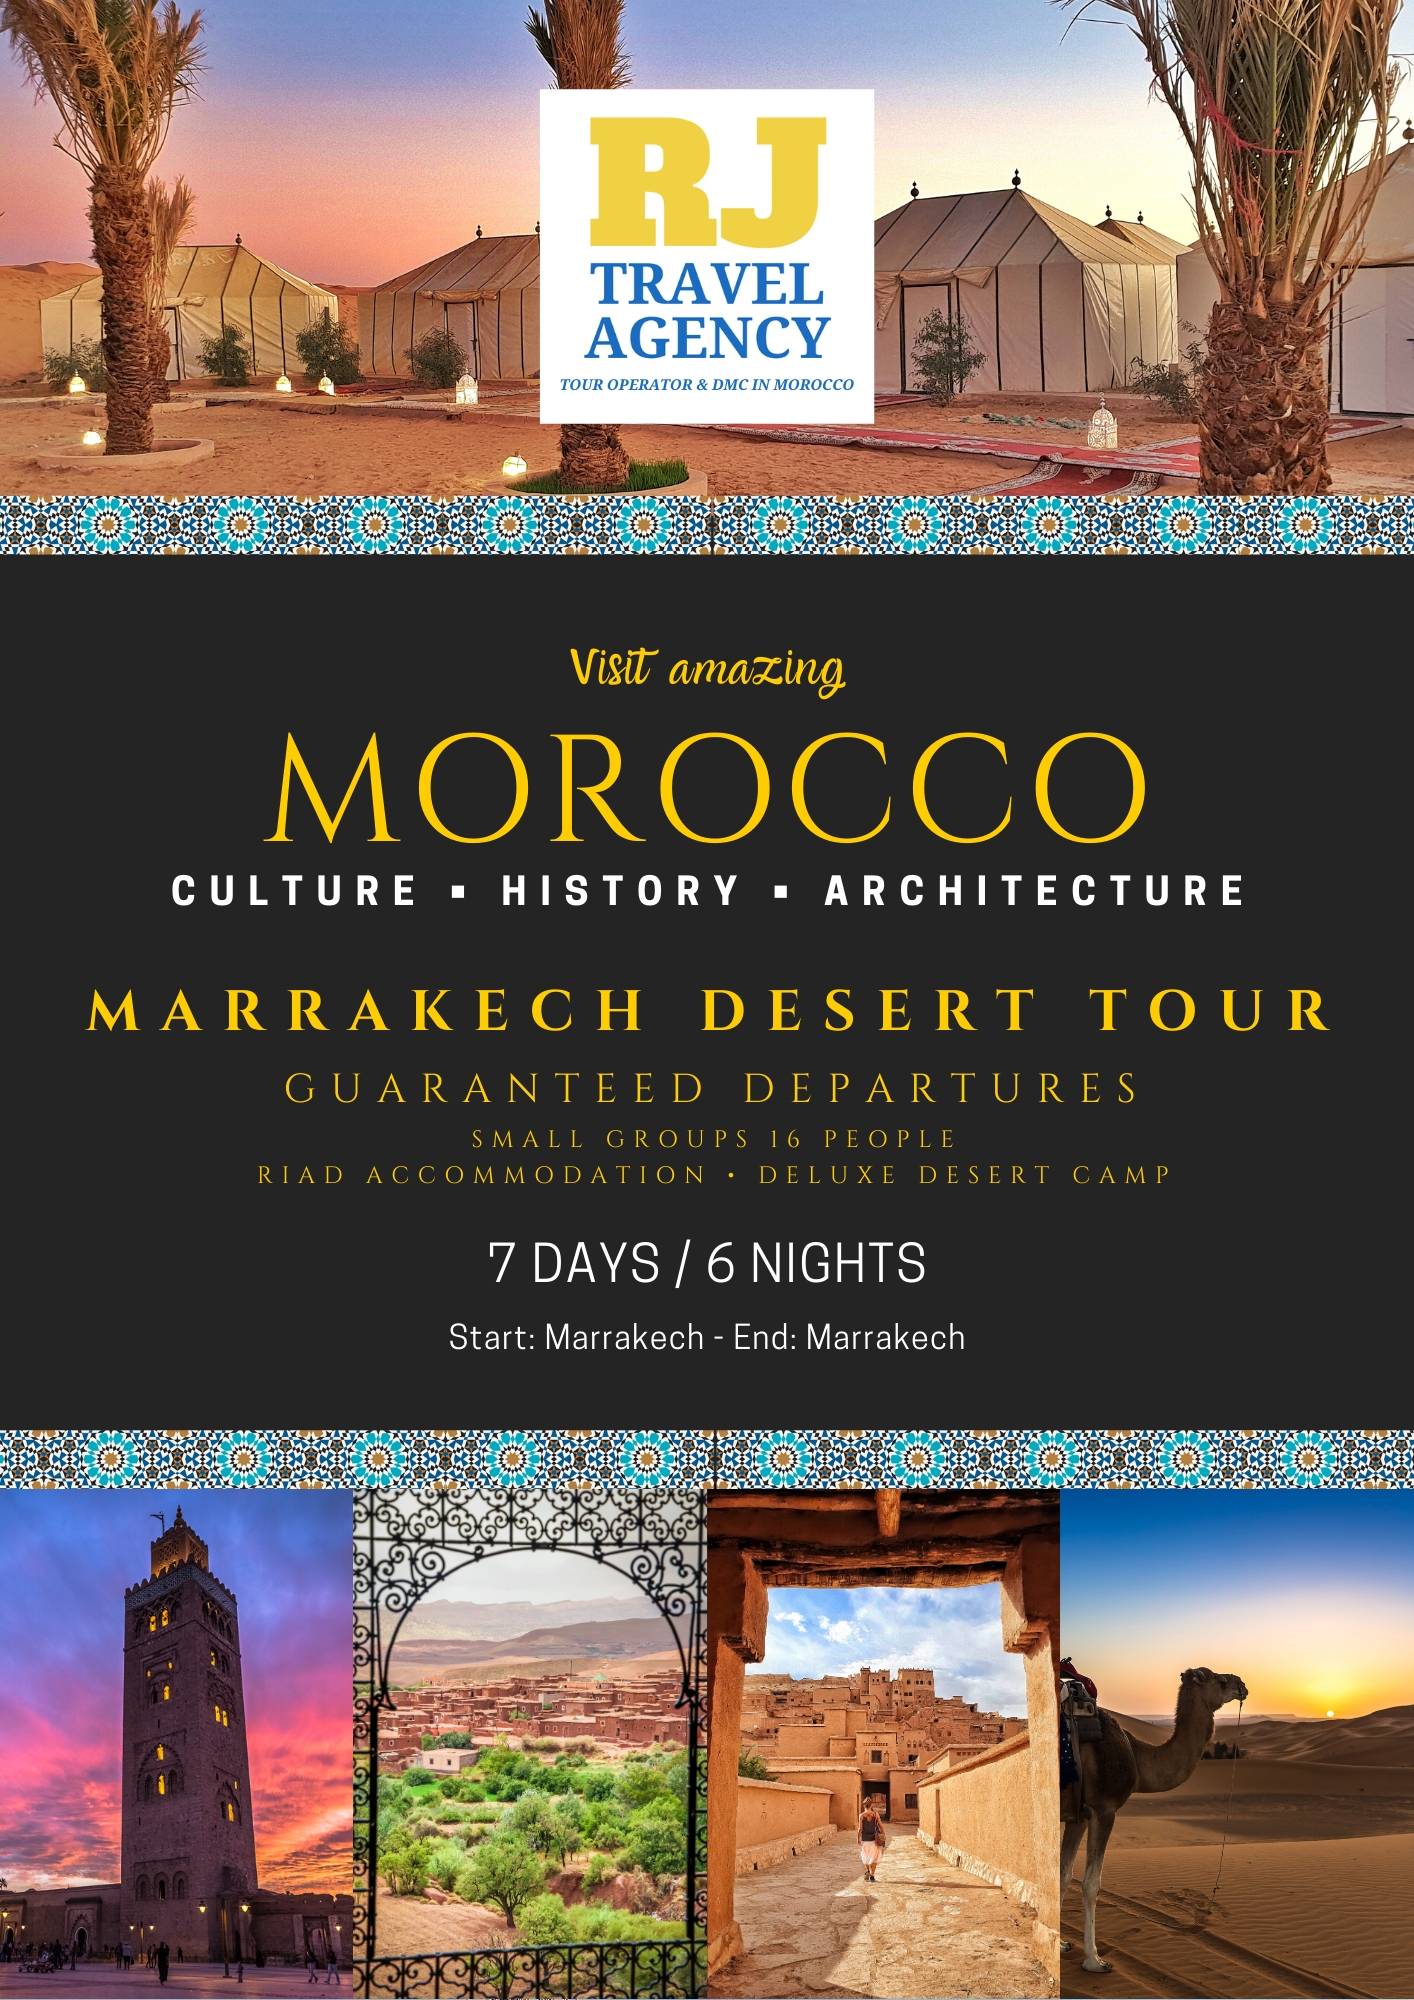 travel companies going to morocco